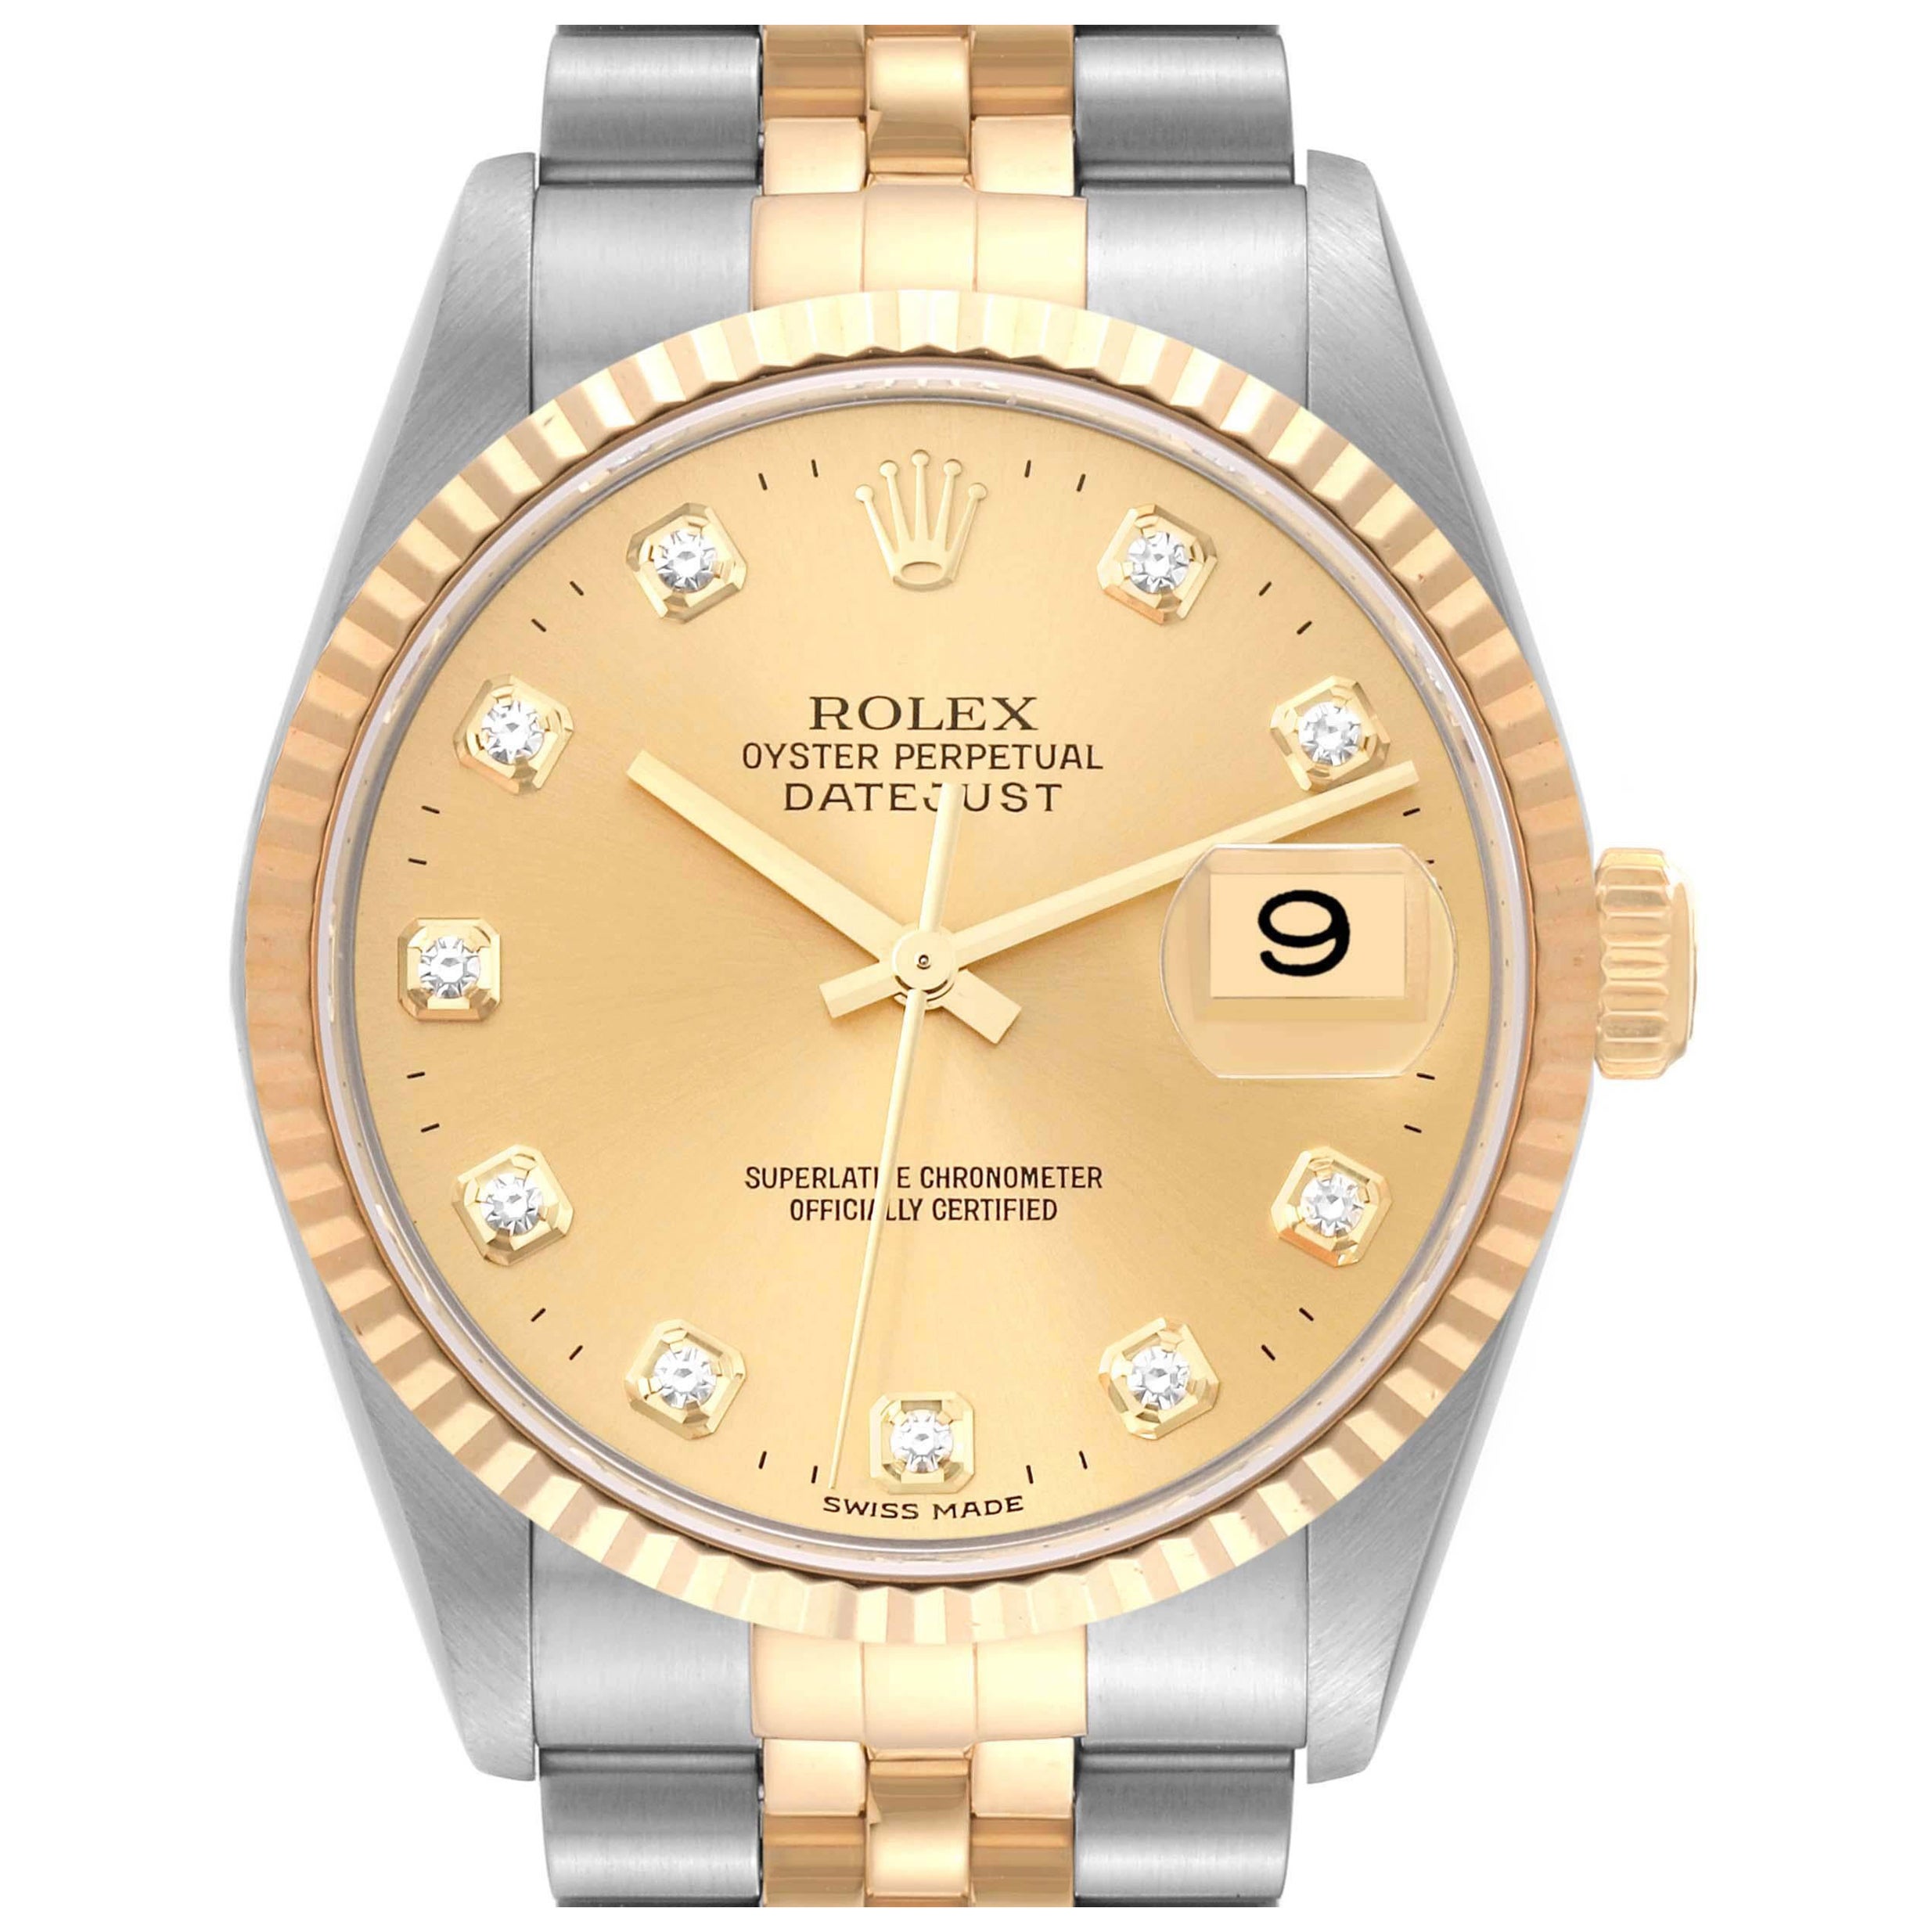 Rolex Datejust Champagne Diamond Dial Steel Yellow Gold Mens Watch 16233